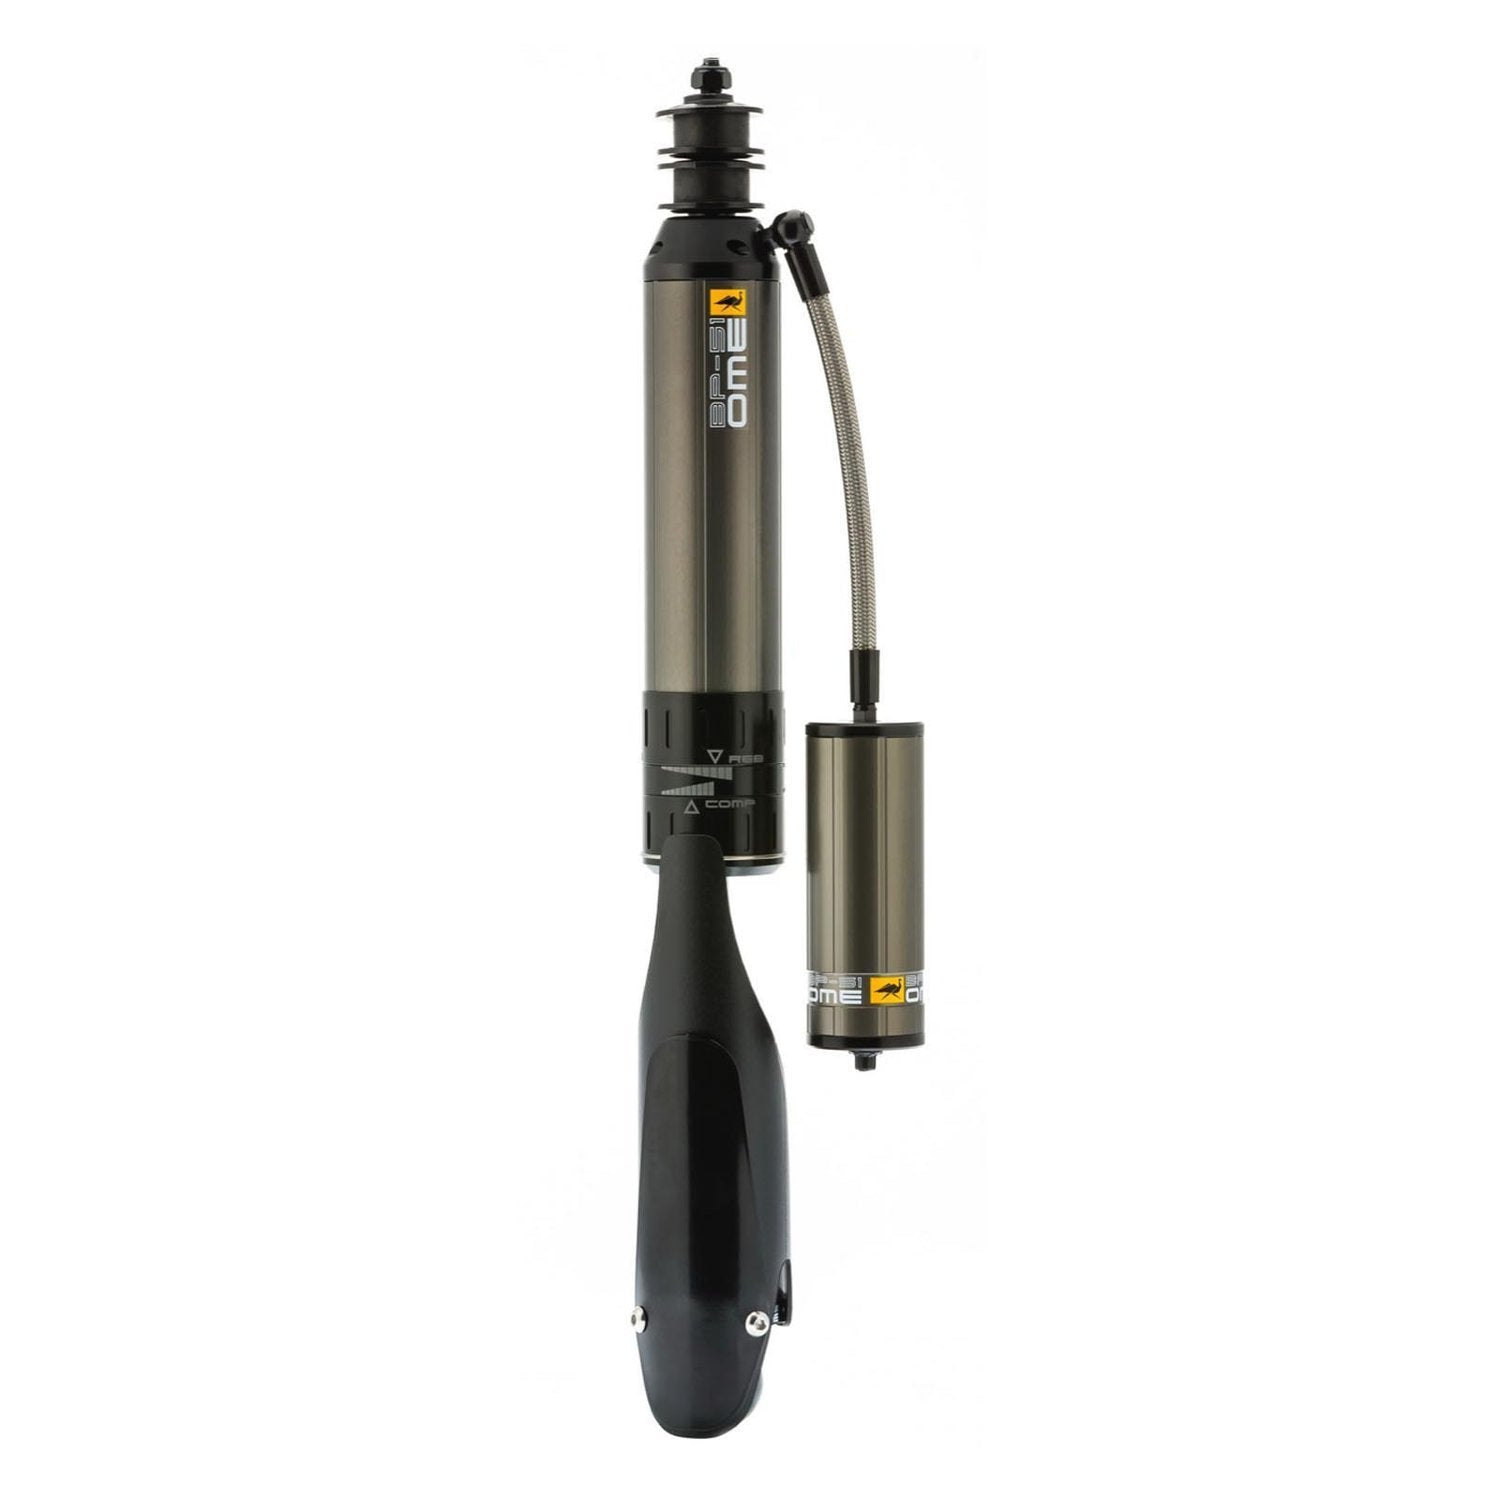 A black and yellow OME air compressor with Old Man Emu BP-51 Rear Shock Absorber LH BP5160011L for Toyota Tacoma (2005-2015) on a white background.